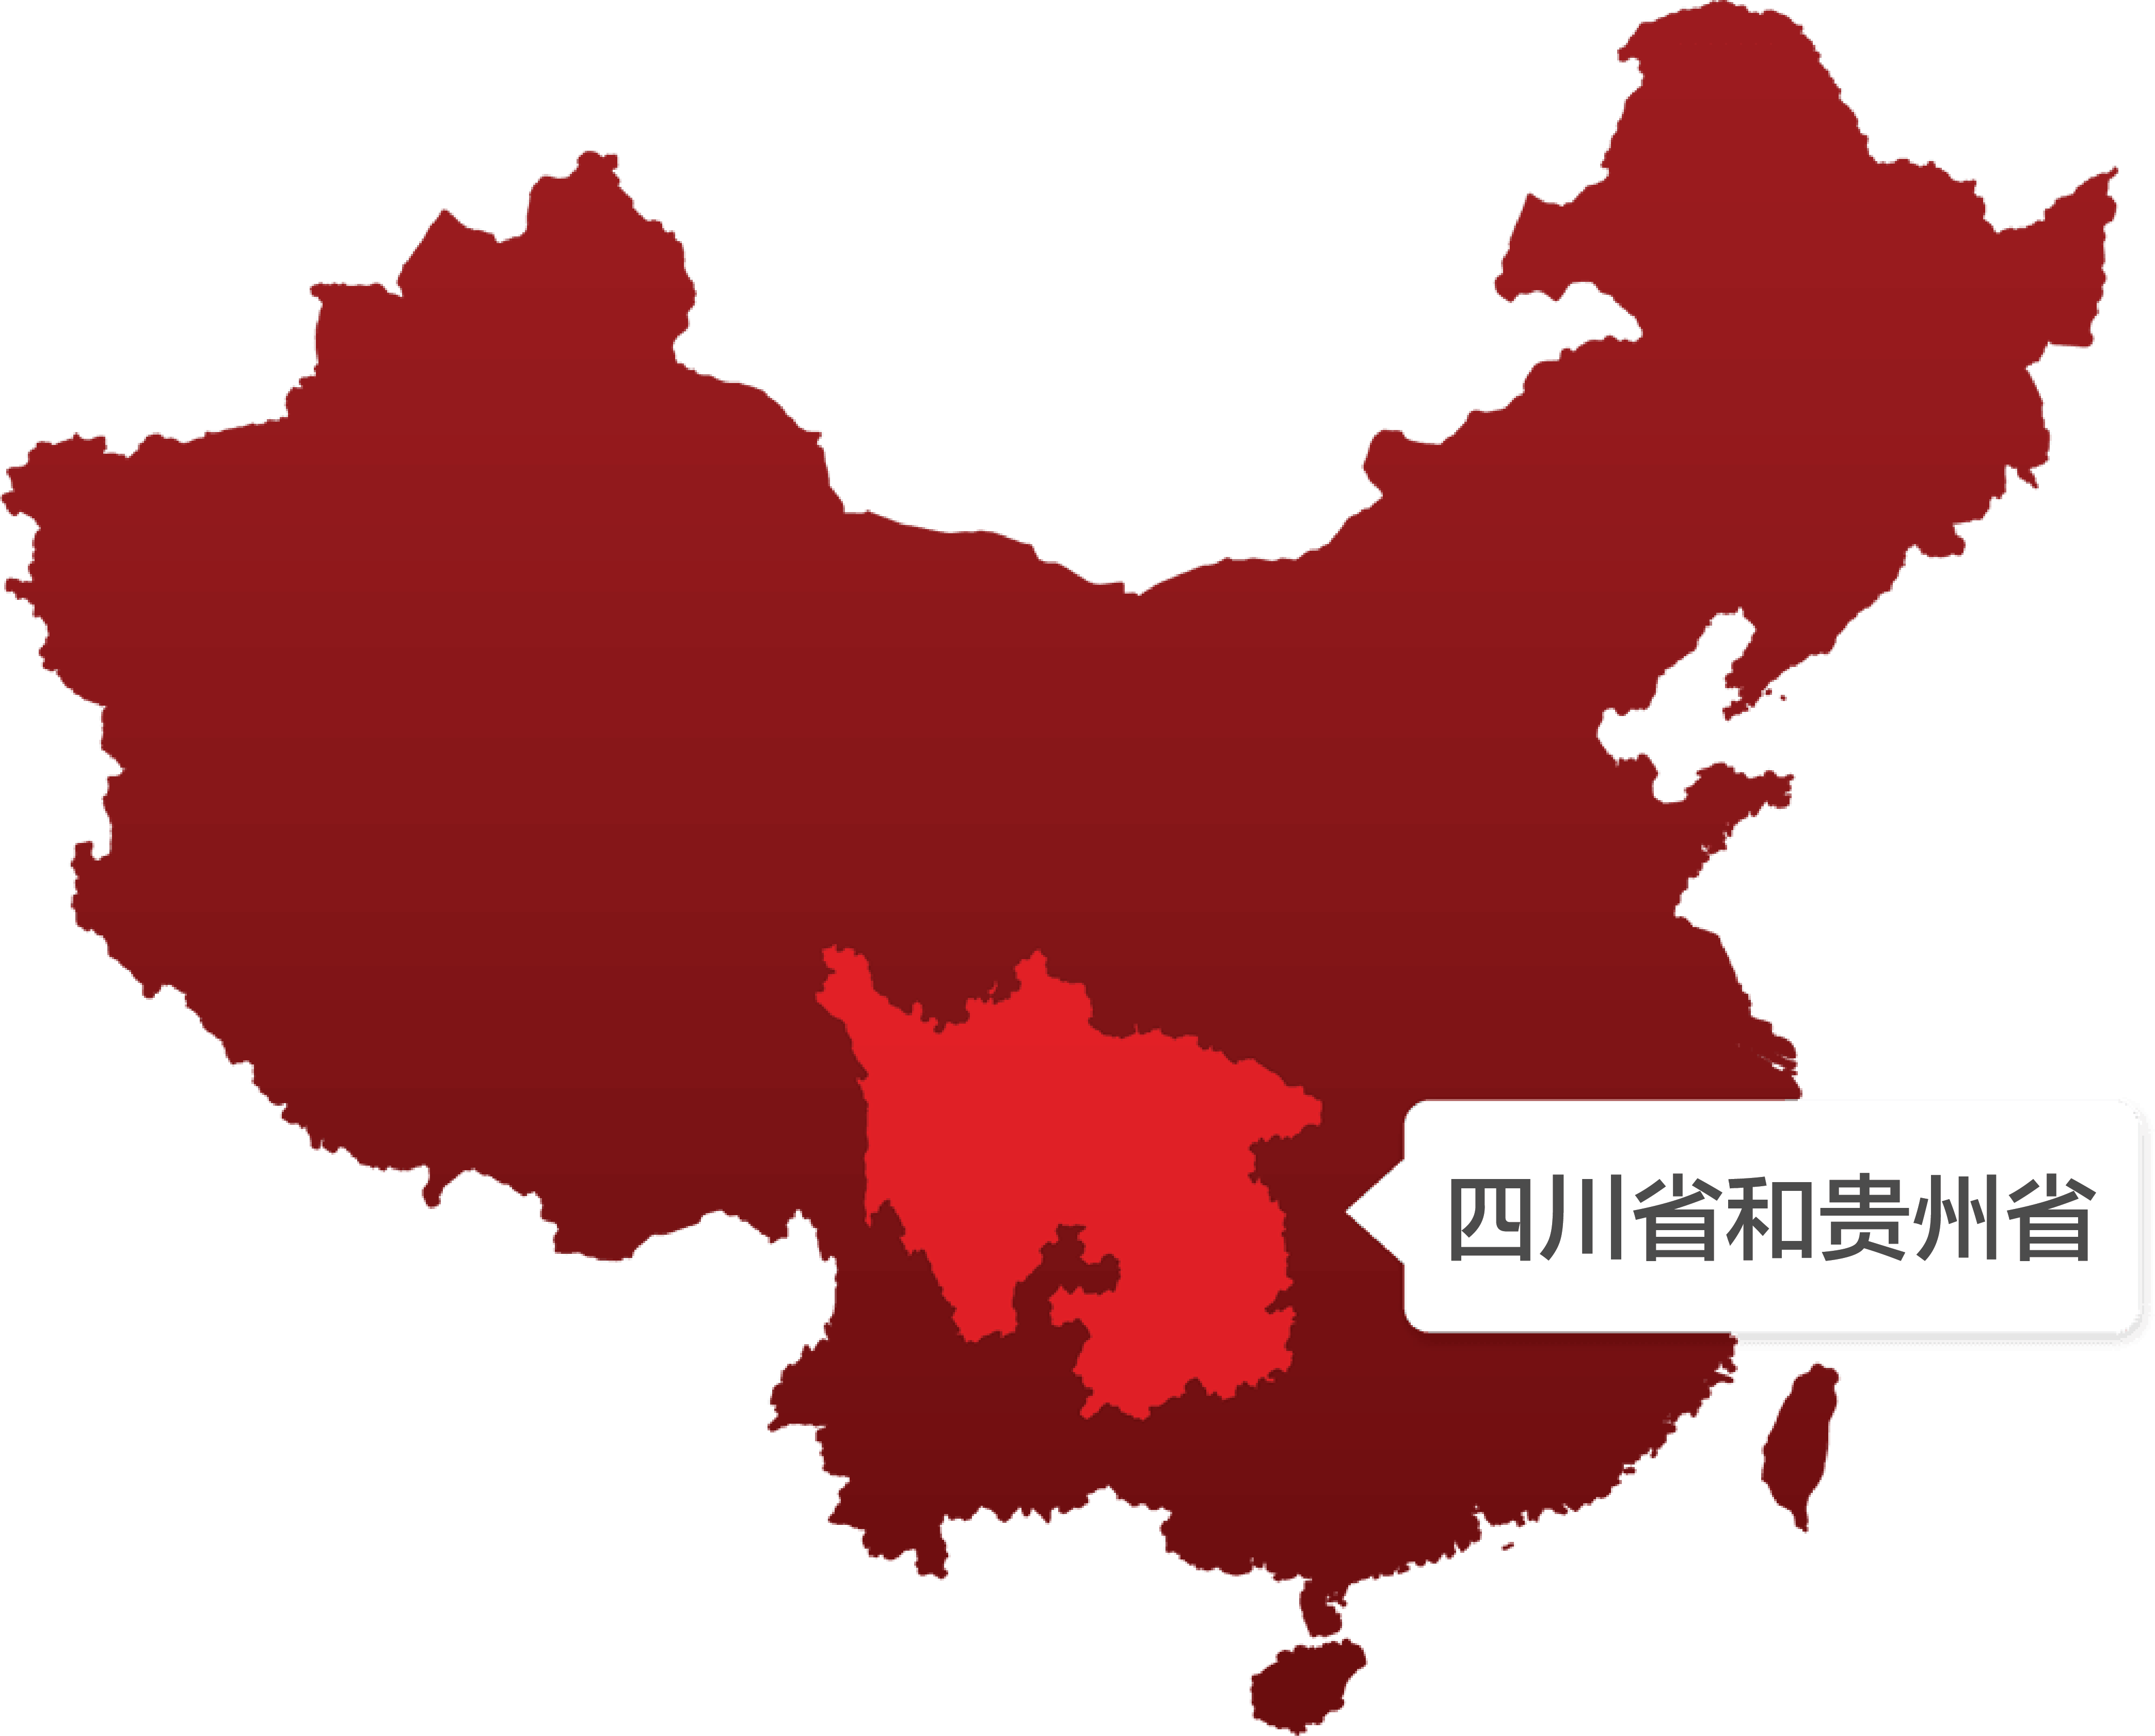 Image of The Sichuan Province & Guizhou Province